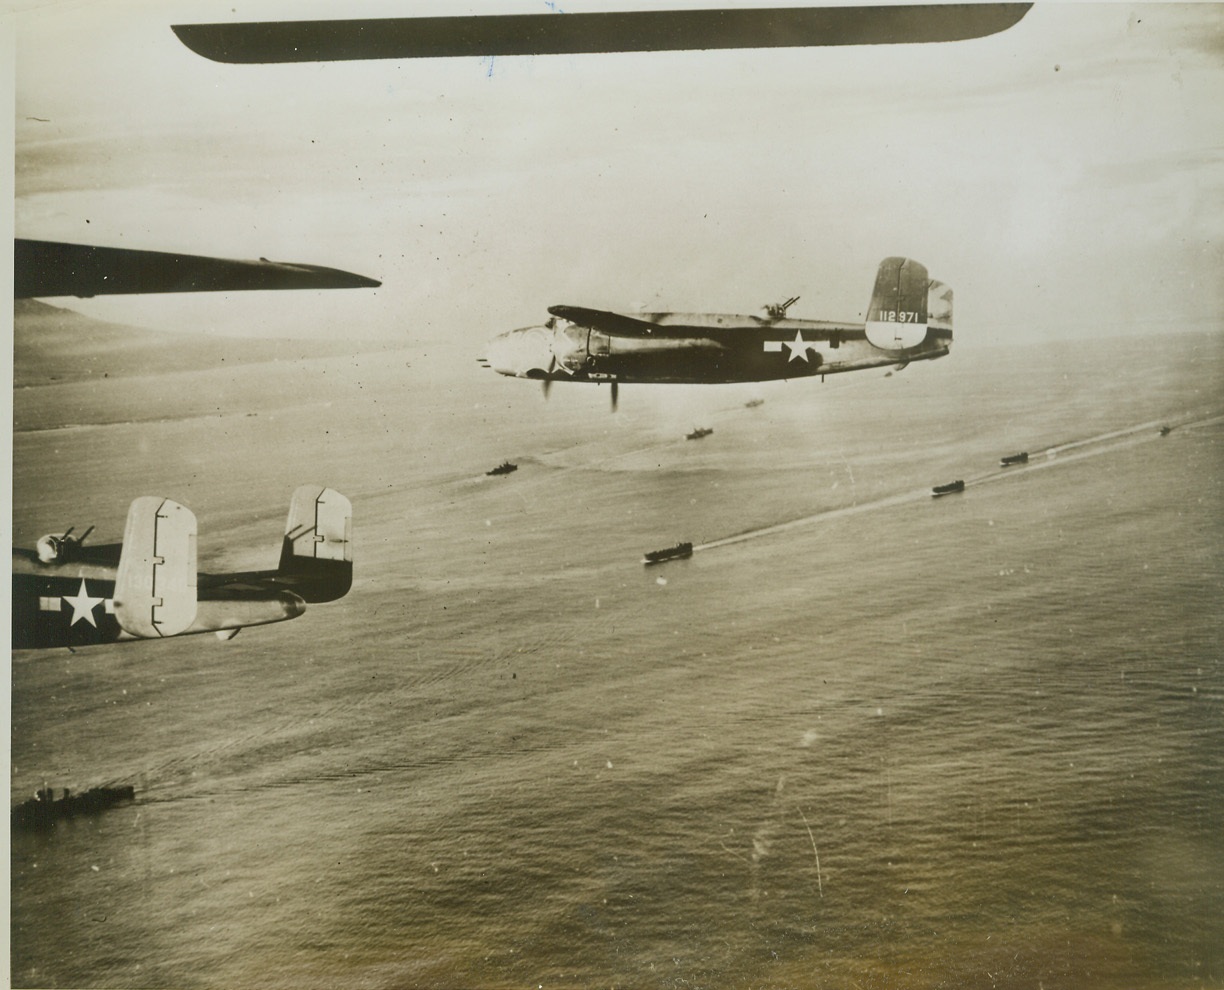 Mitchells Cover Gloucester Landing, 1/26/1944. This photo, released today in the U.S. shows B-25 Mitchell bombers of the U.S. Army 5th Air Force, covering Allied landing boats as they headed for a landing at Cape Gloucester on New Britain Island in the Southwest Pacific, Allied forces, after having neutralized Rabaul, important base on the island, are gradually closing in on the Japs there. Credit: (U.S. Army Air Force Photo from ACME);